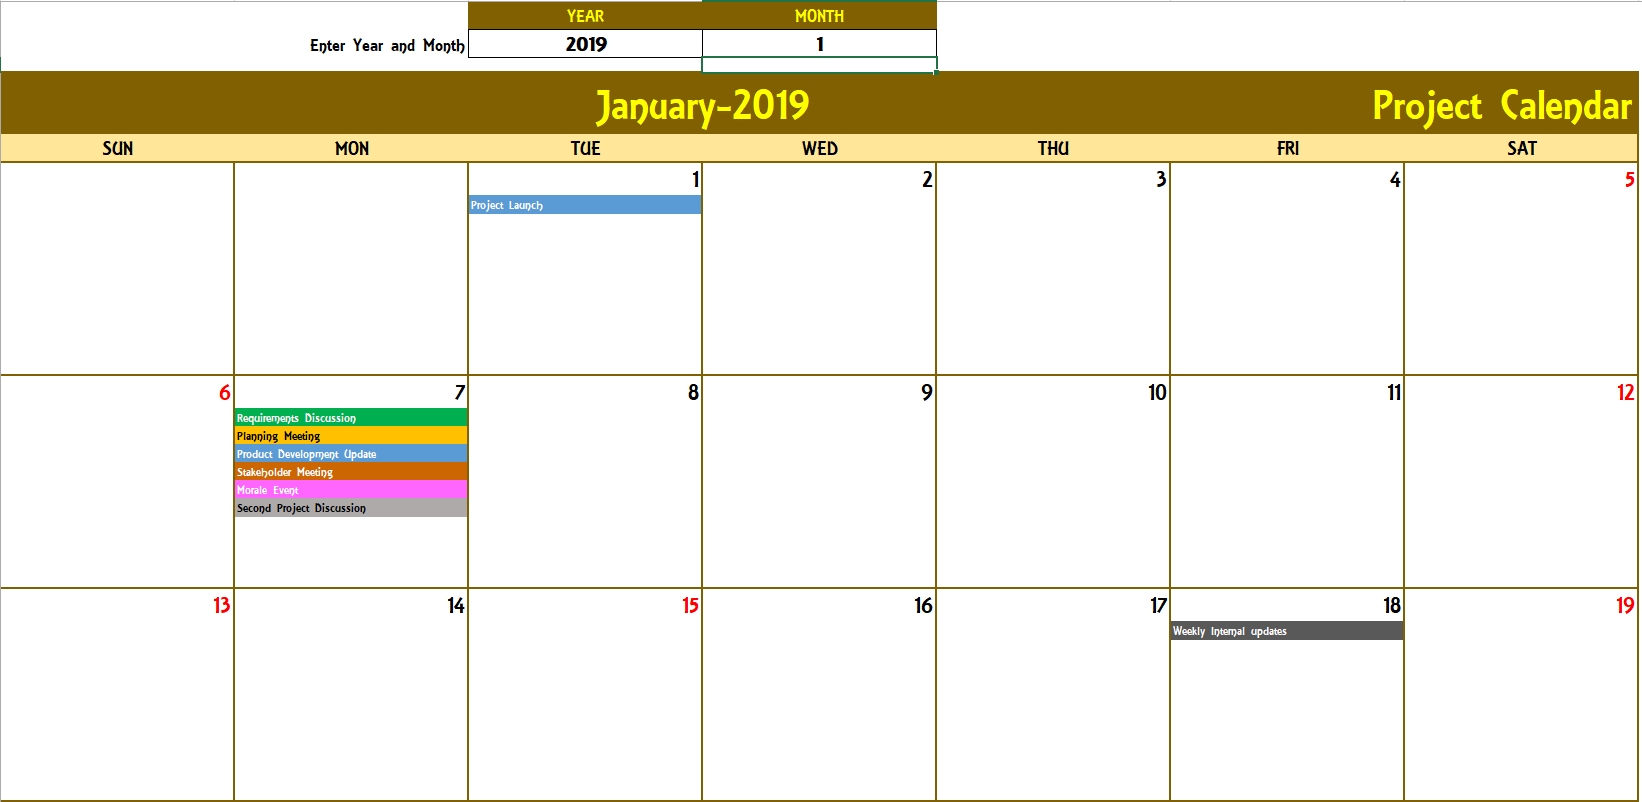 Excel Calendar Template - Excel Calendar 2019, 2020 Or Any Year regarding Samples Of Monthly Activity Calendar Templates And Designs